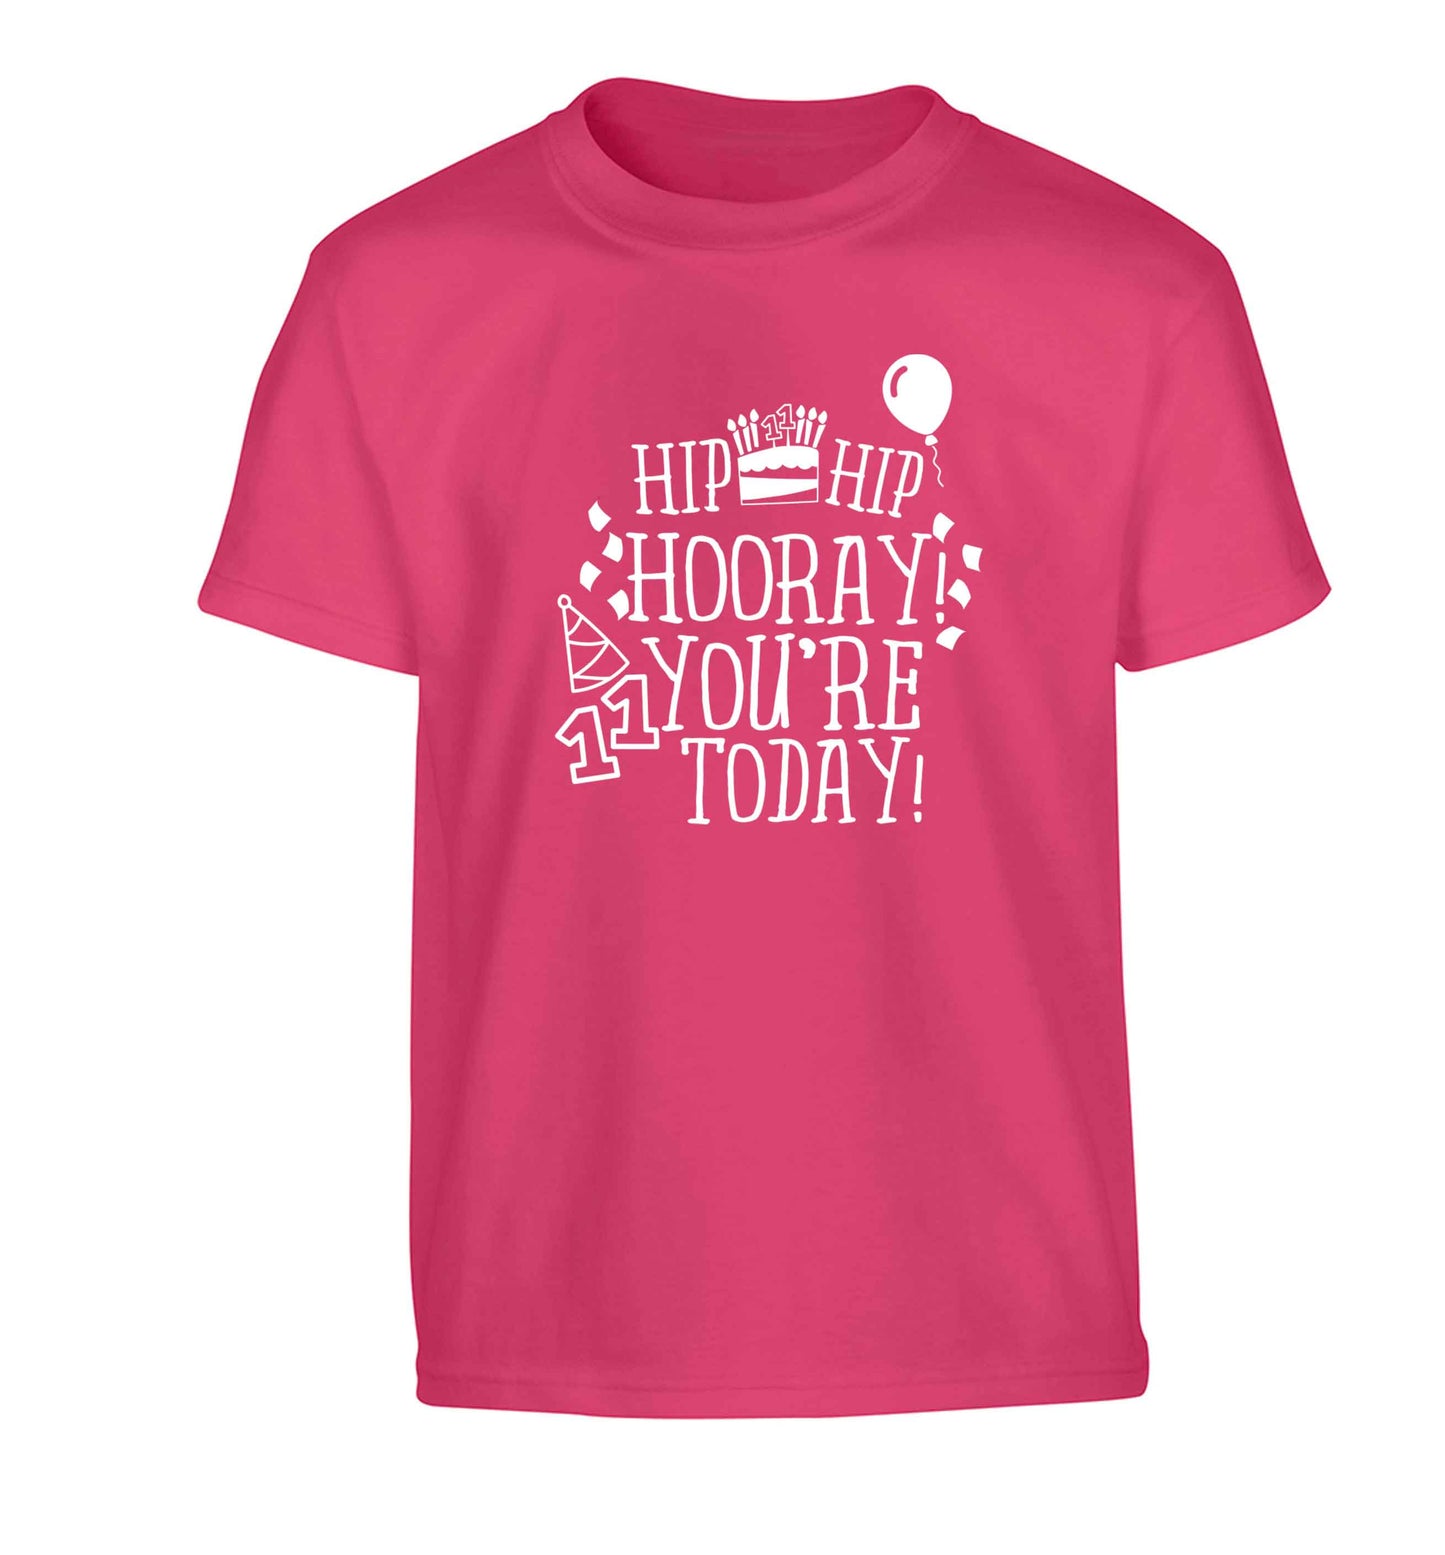 Hip hip hooray I you're eleven today! Children's pink Tshirt 12-13 Years